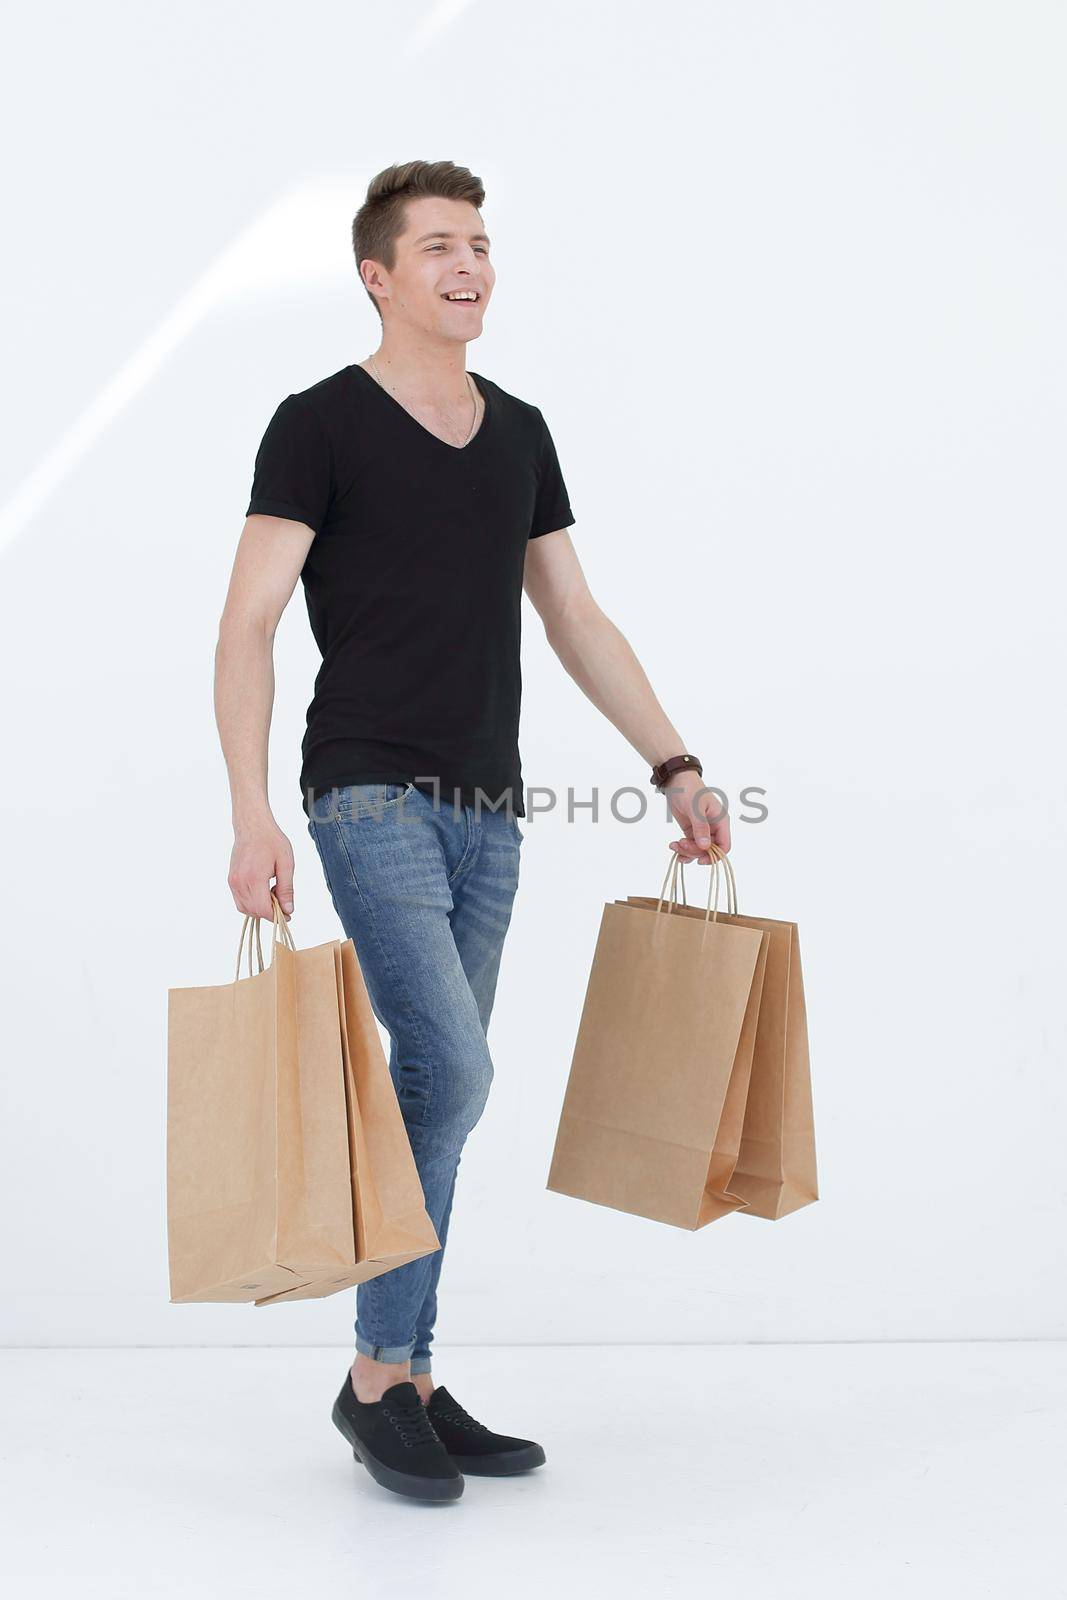 Handsome man in a black T-shirt with a bag by asdf